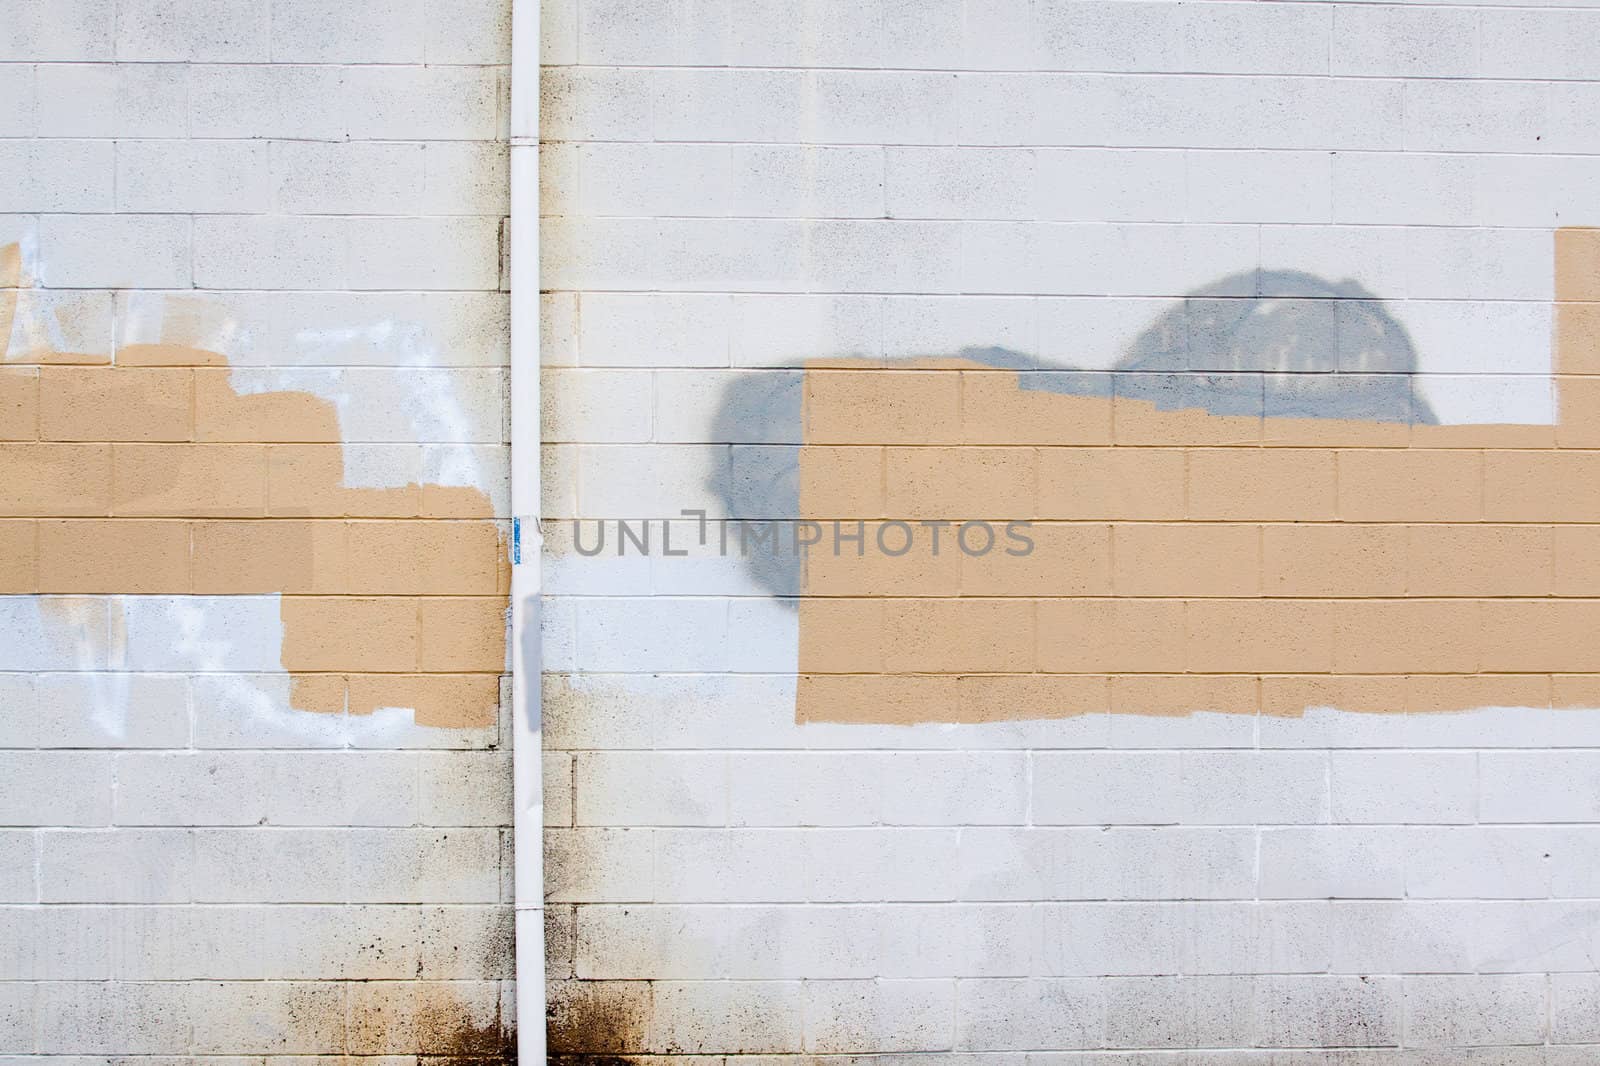 A grey wall has rectangular and square patches of paint used to cover up graffiti and vandalism along the side of an urban building.